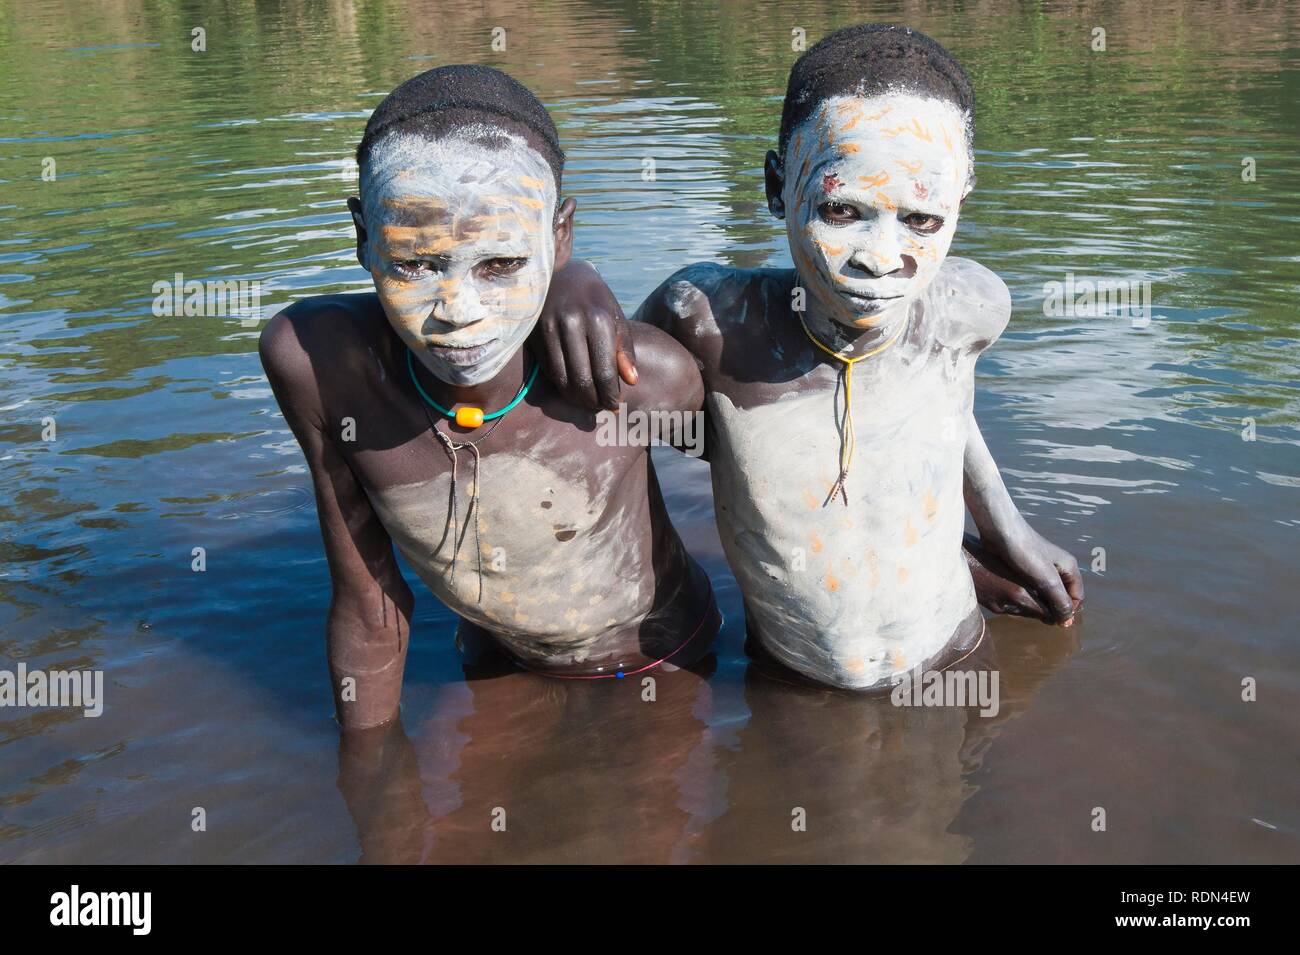 Karo boy with facial and body paintings, omo river valley